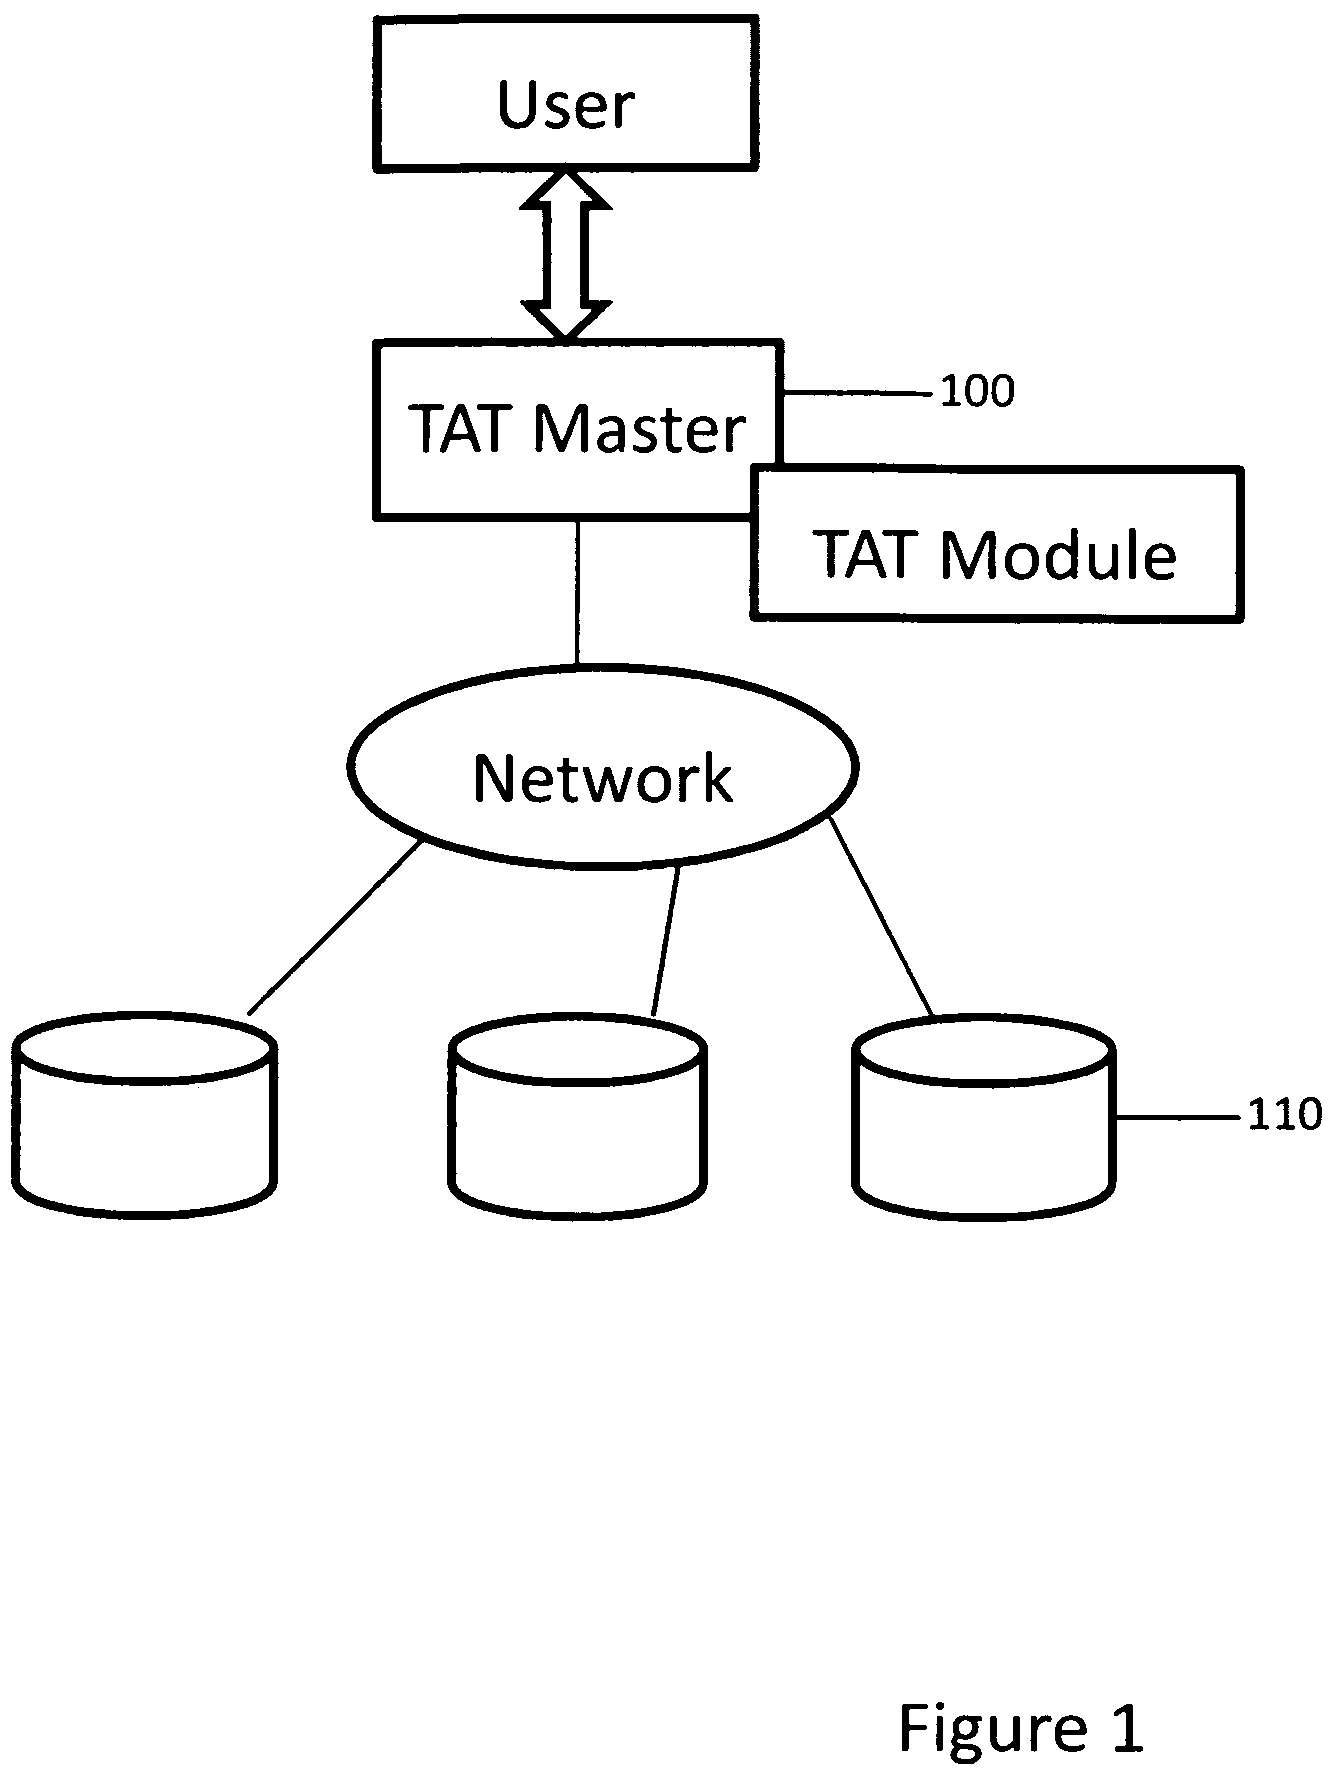 Test management system and method